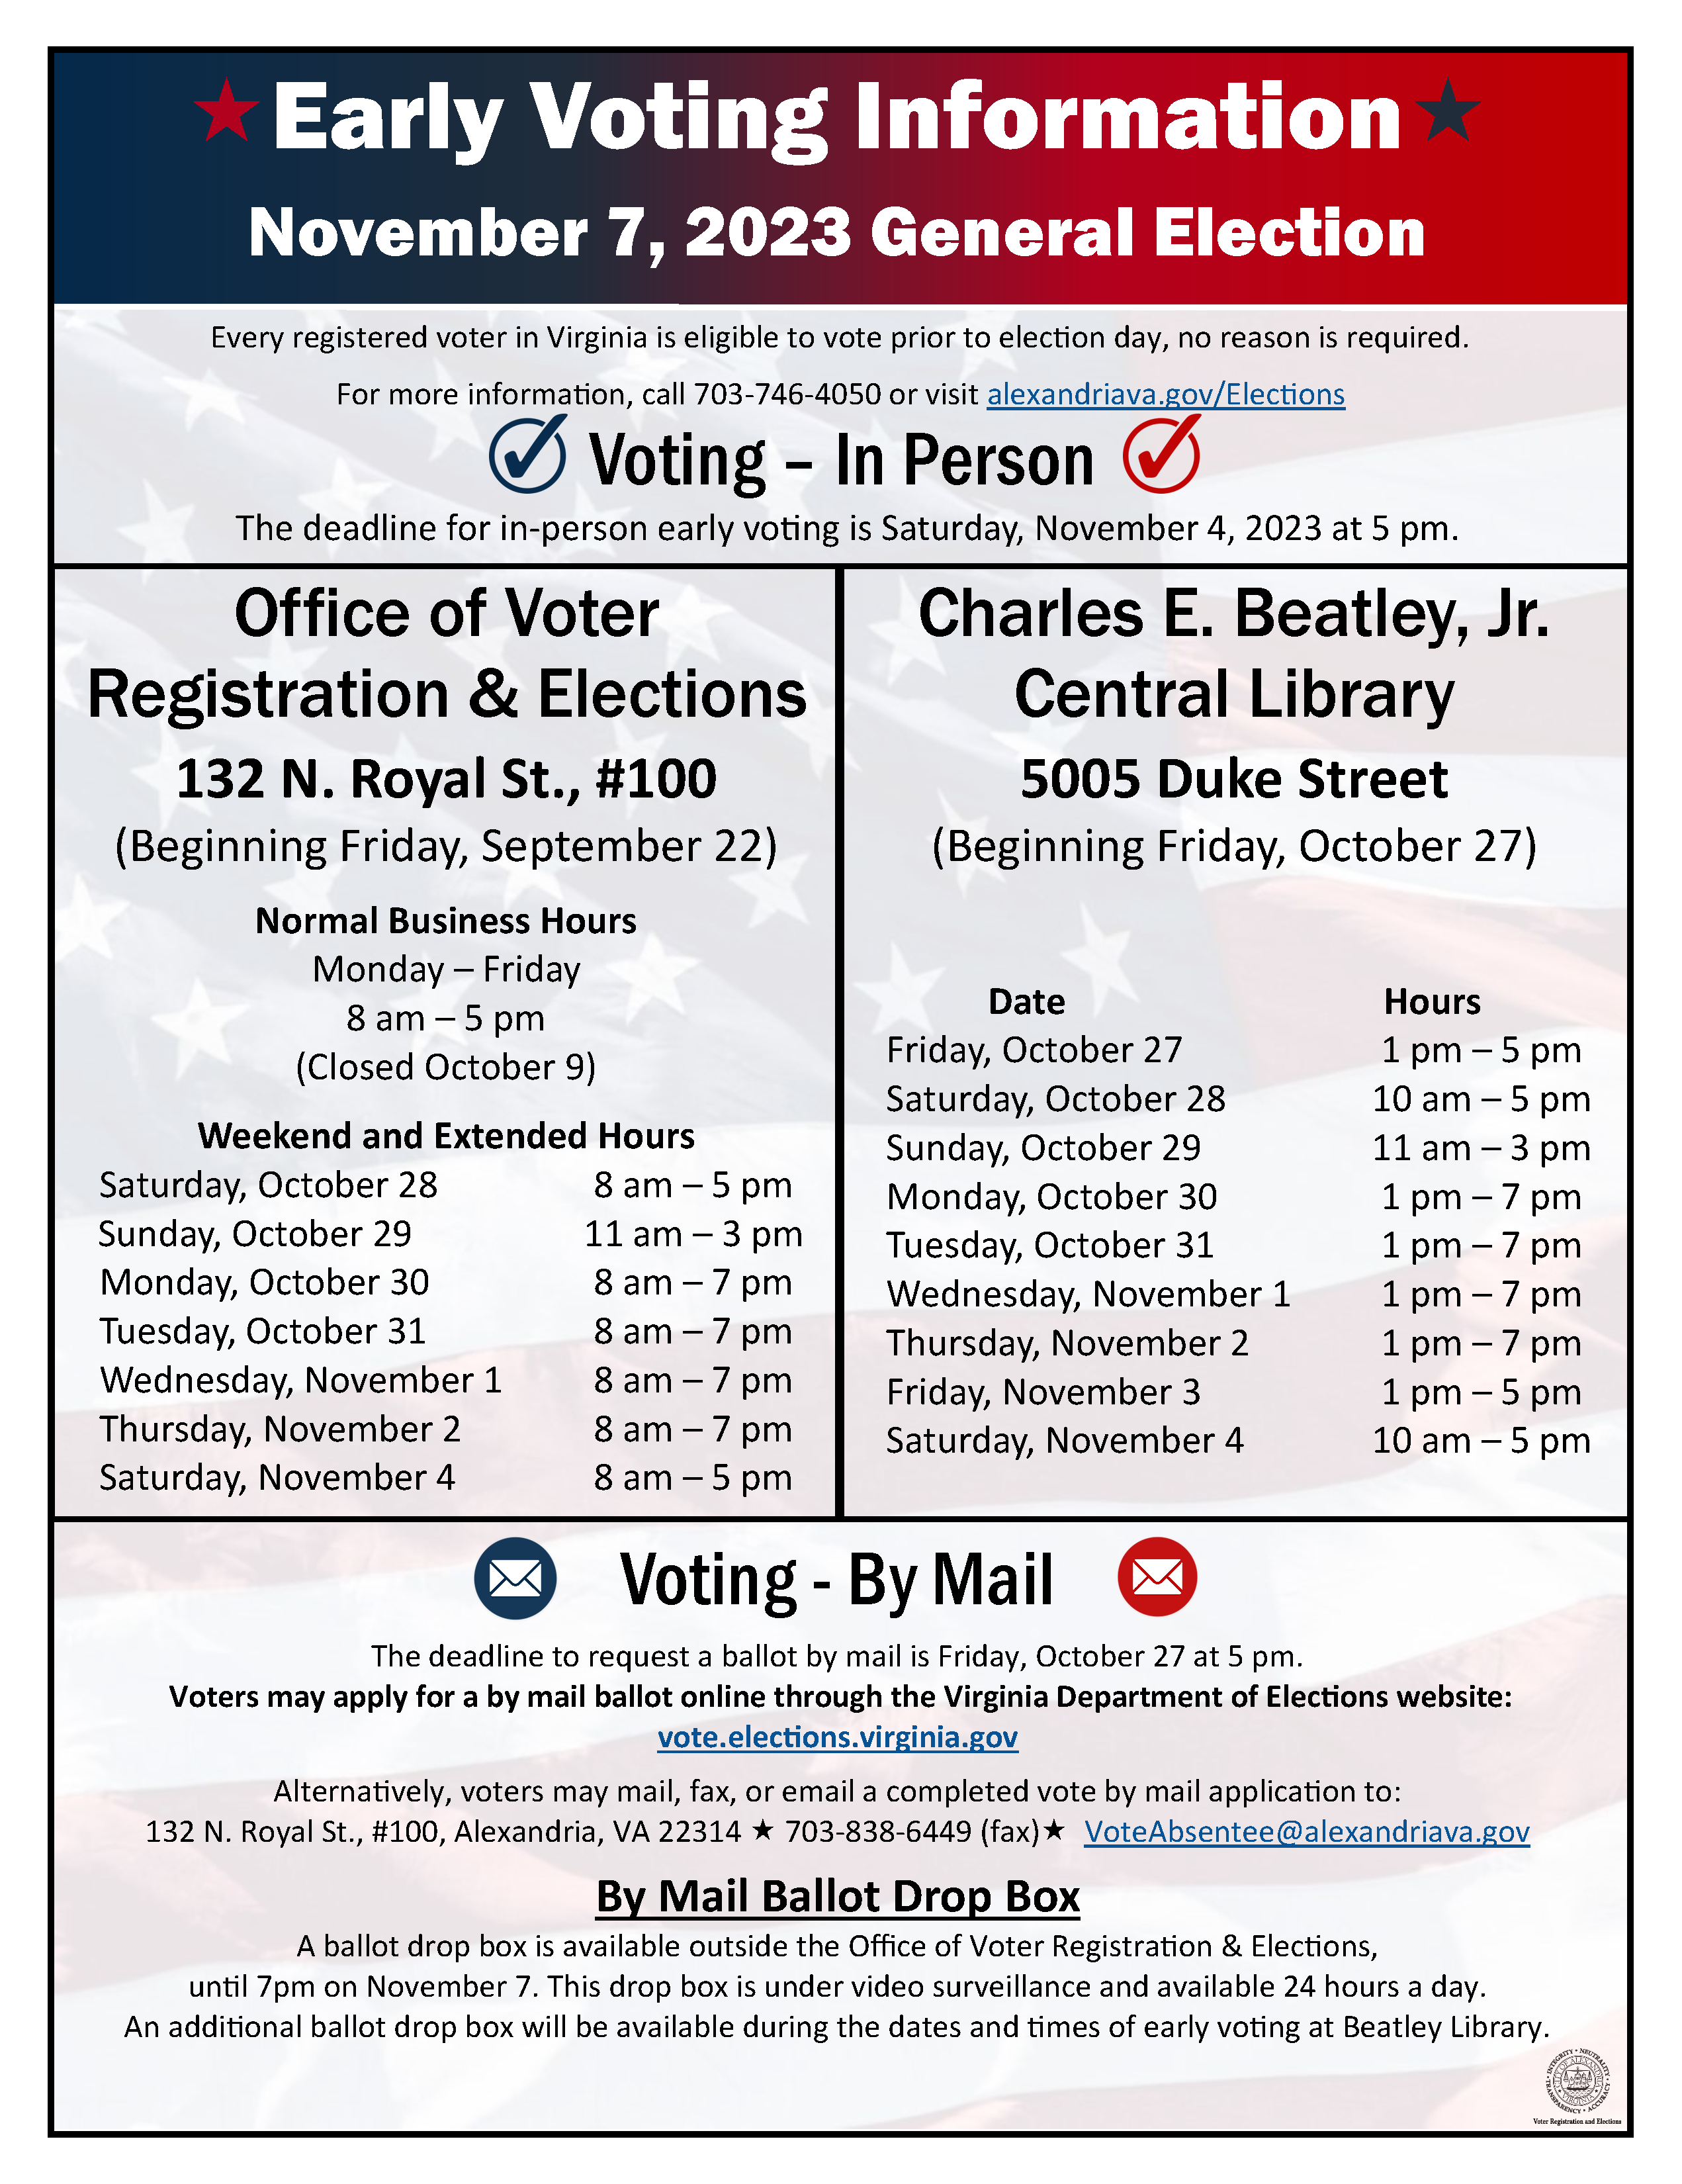 Early Voting dates, times, and locations. See below if image is not displaying. 